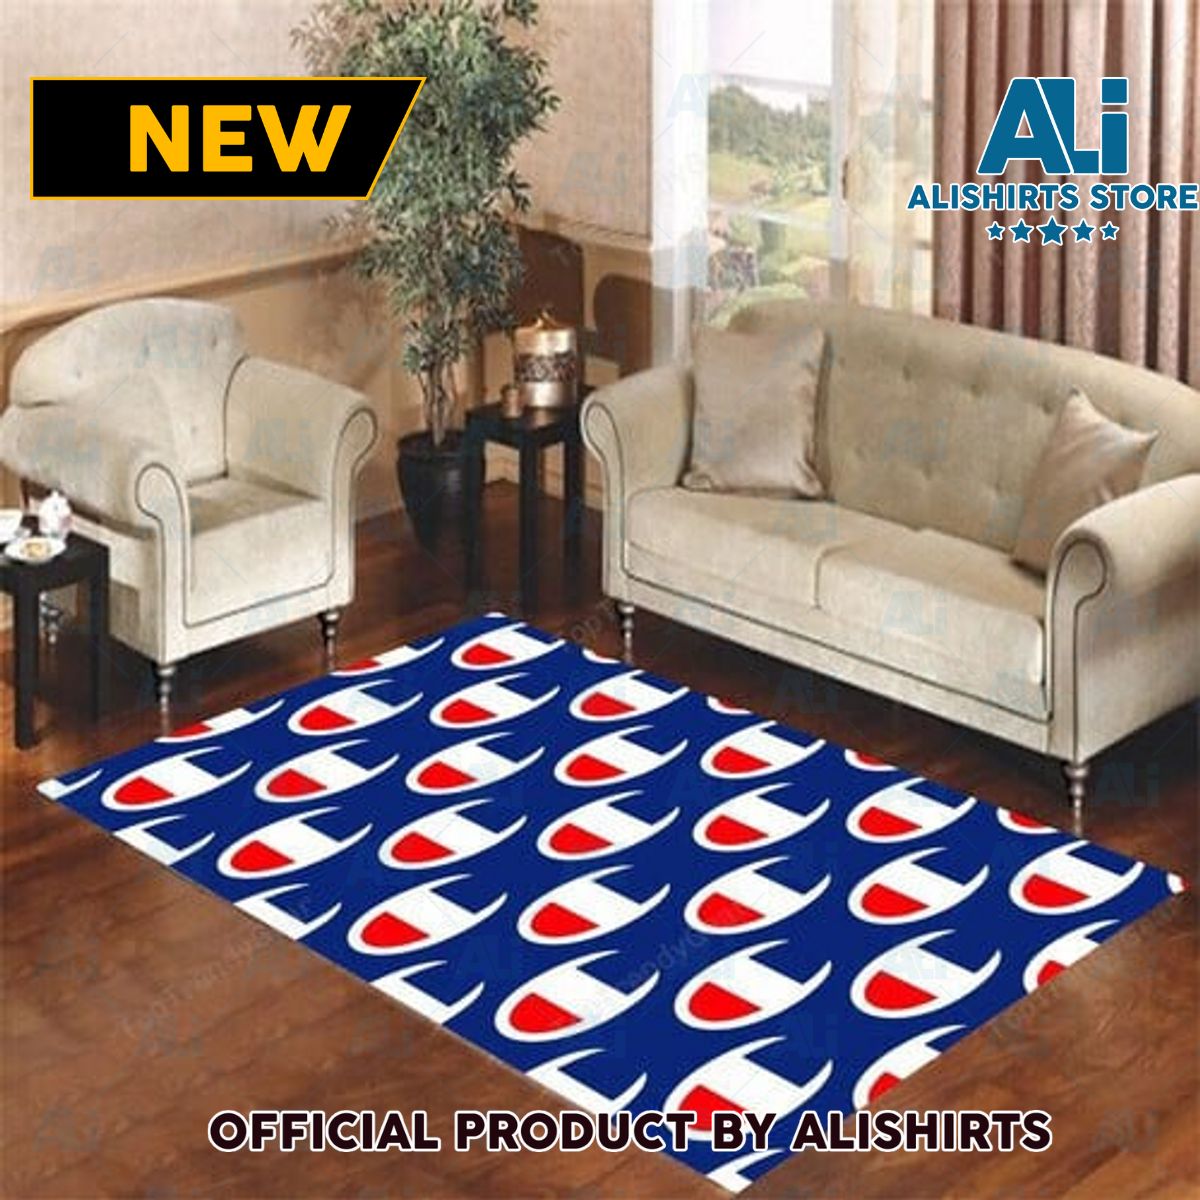 Champion U.S.A. Luxury Brand Rug Carpet For House Decoration